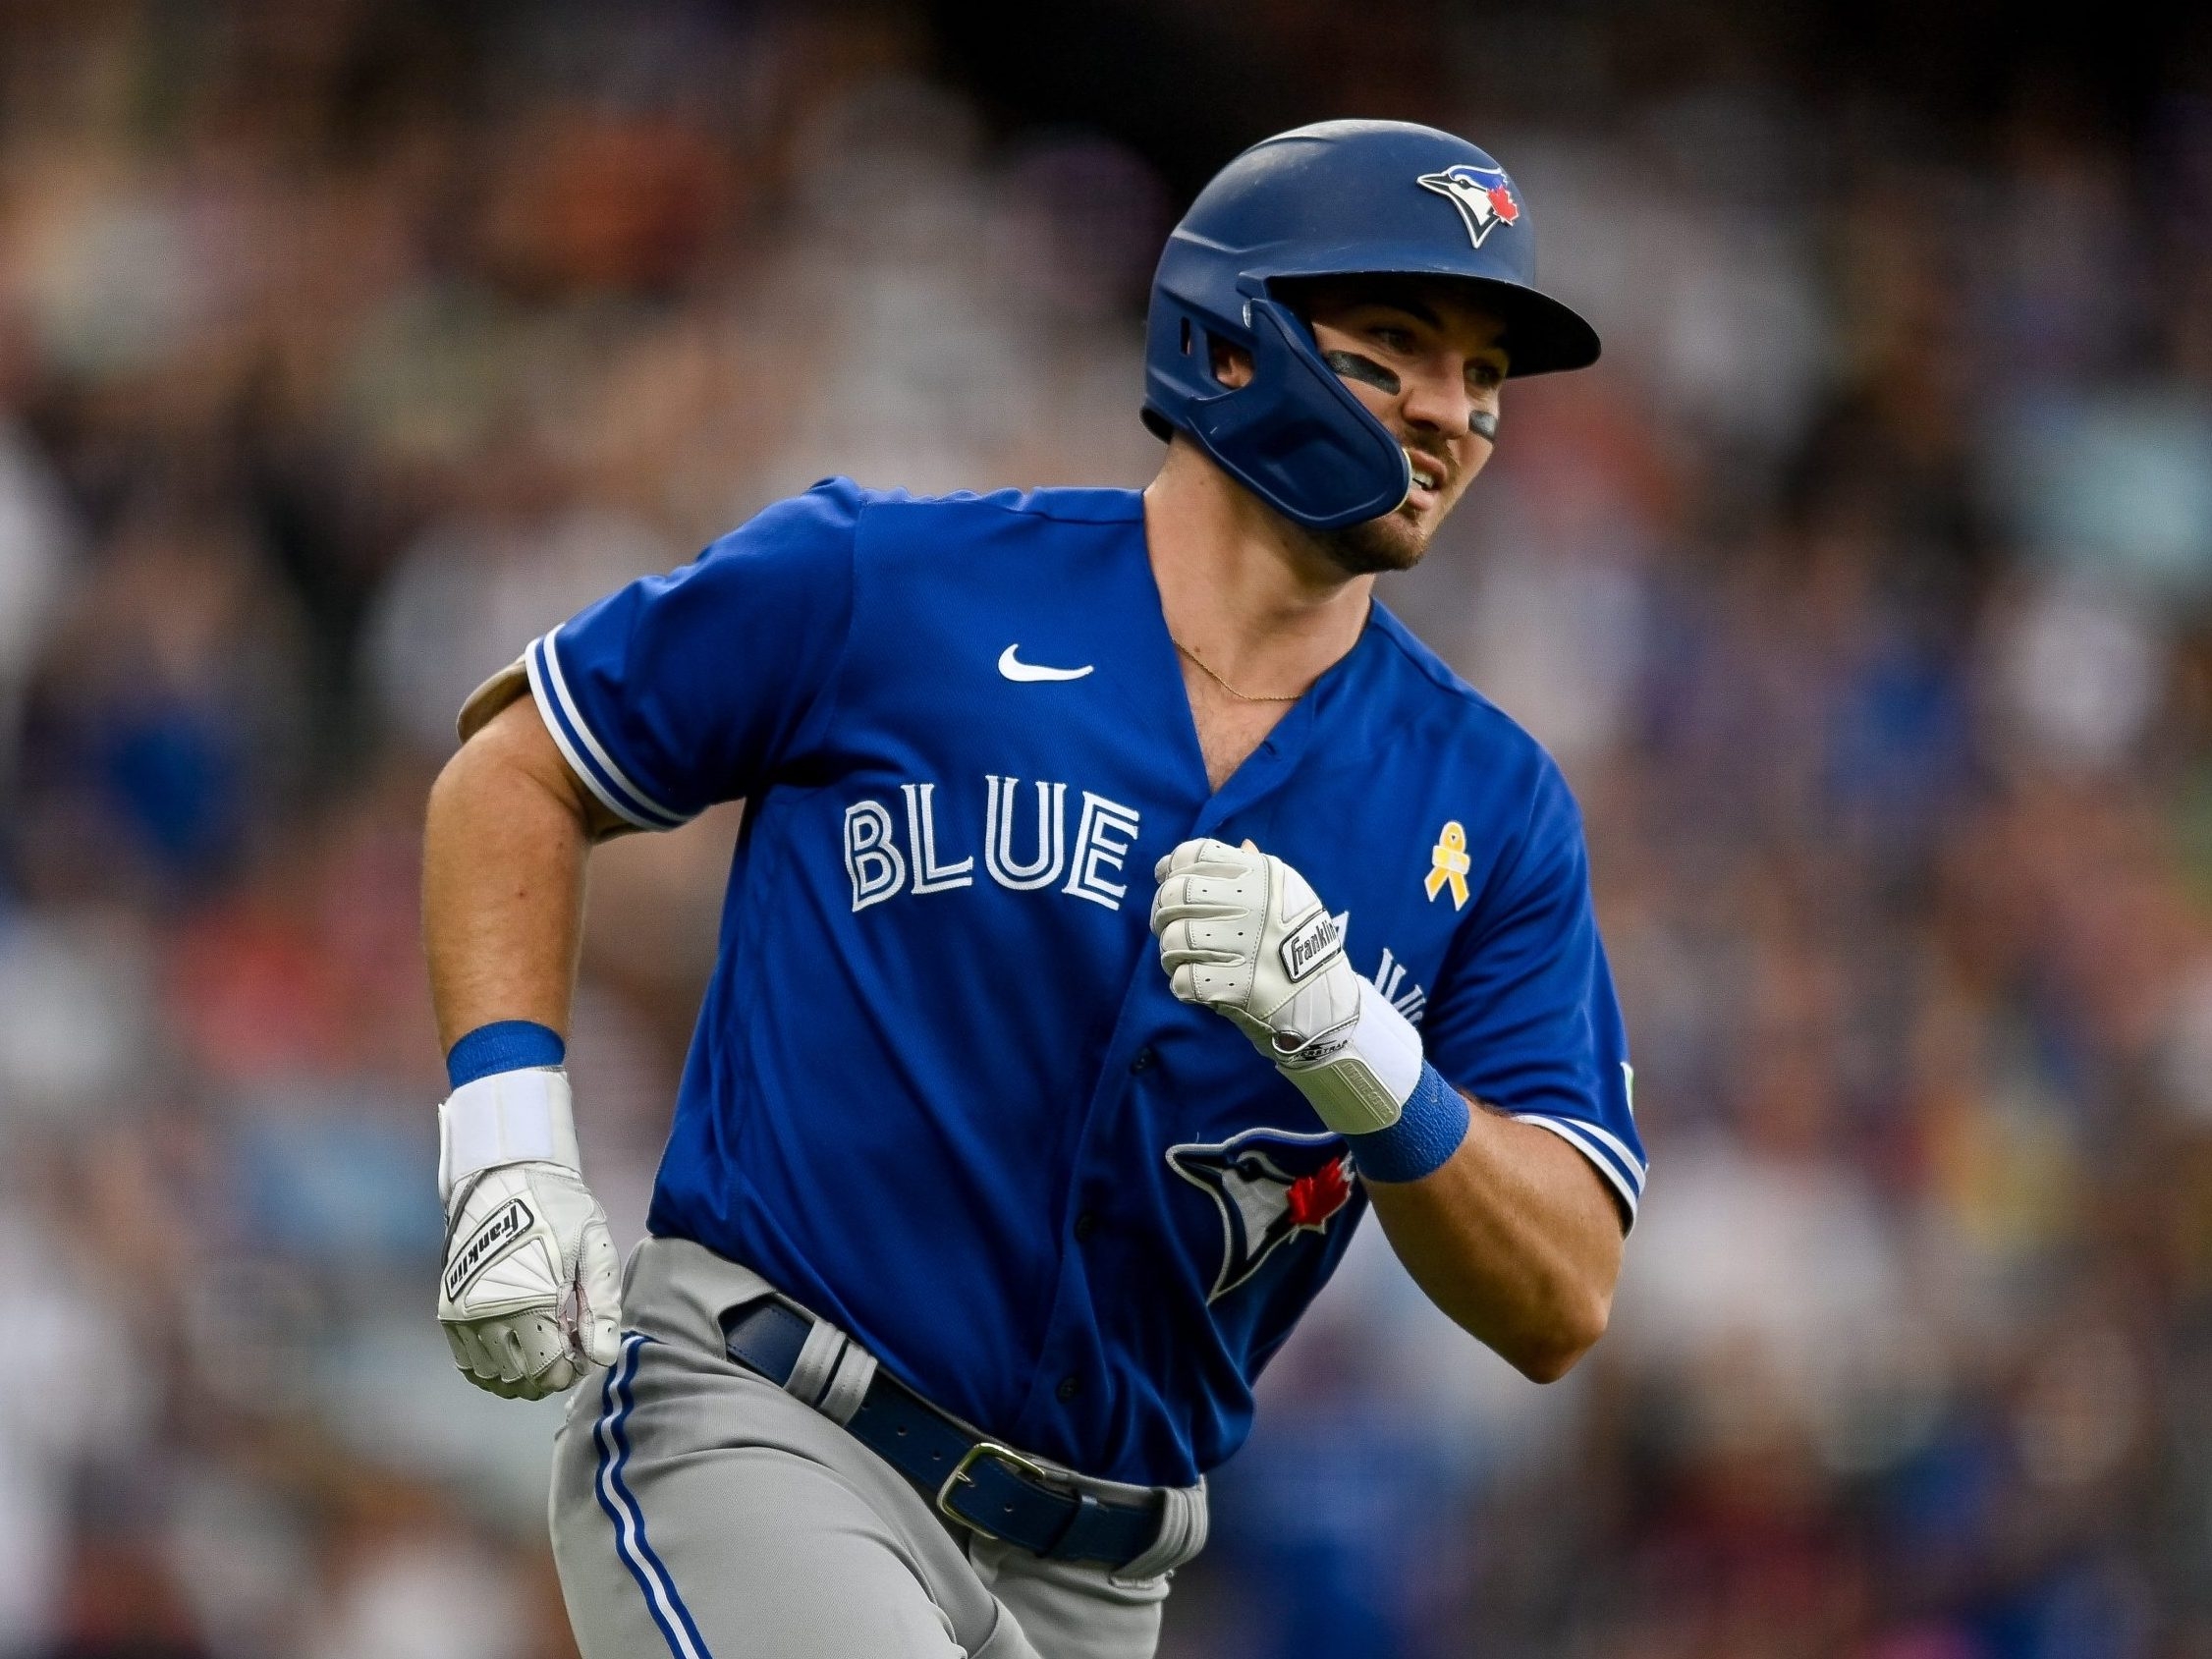 Toronto Blue Jays Game Day Guide